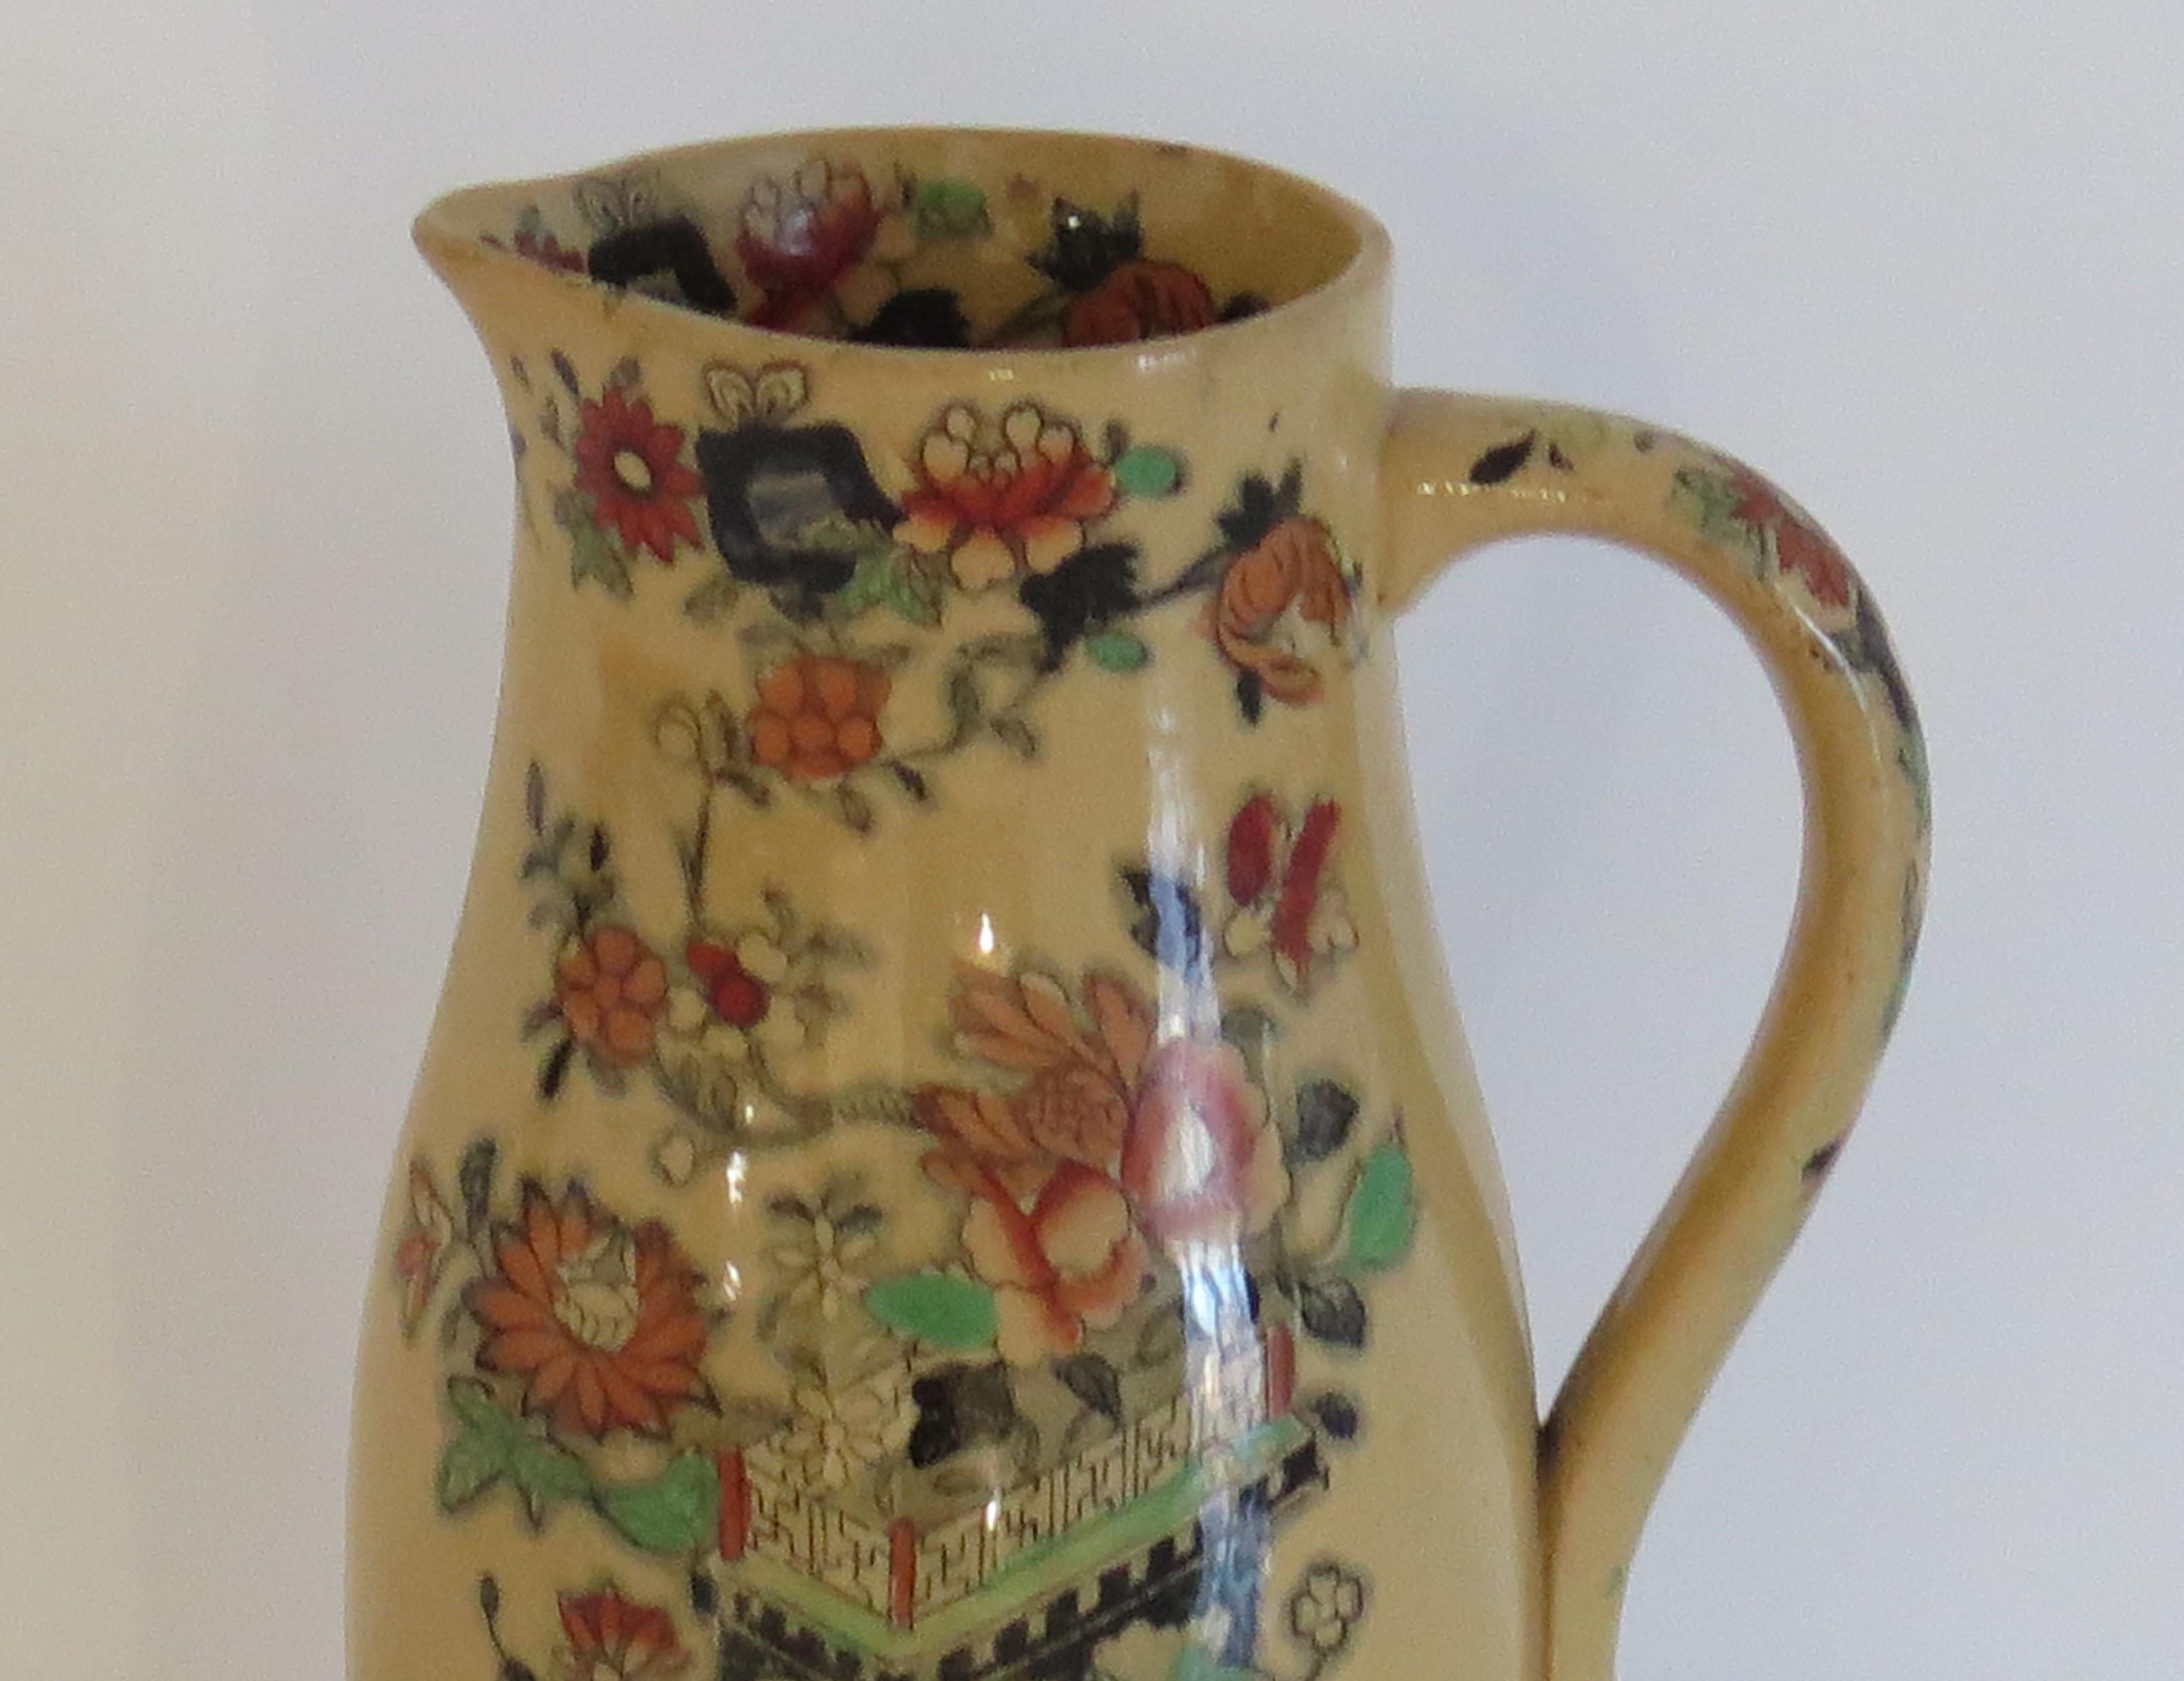 This is rare shape jug or pitcher by Mason's Ironstone pottery in the flower box pattern all dating to the mid-19th century, circa 1830-1851 Victorian period.

This Mason's jug also has a rare pattern, with a beautiful ochre glaze having beautiful